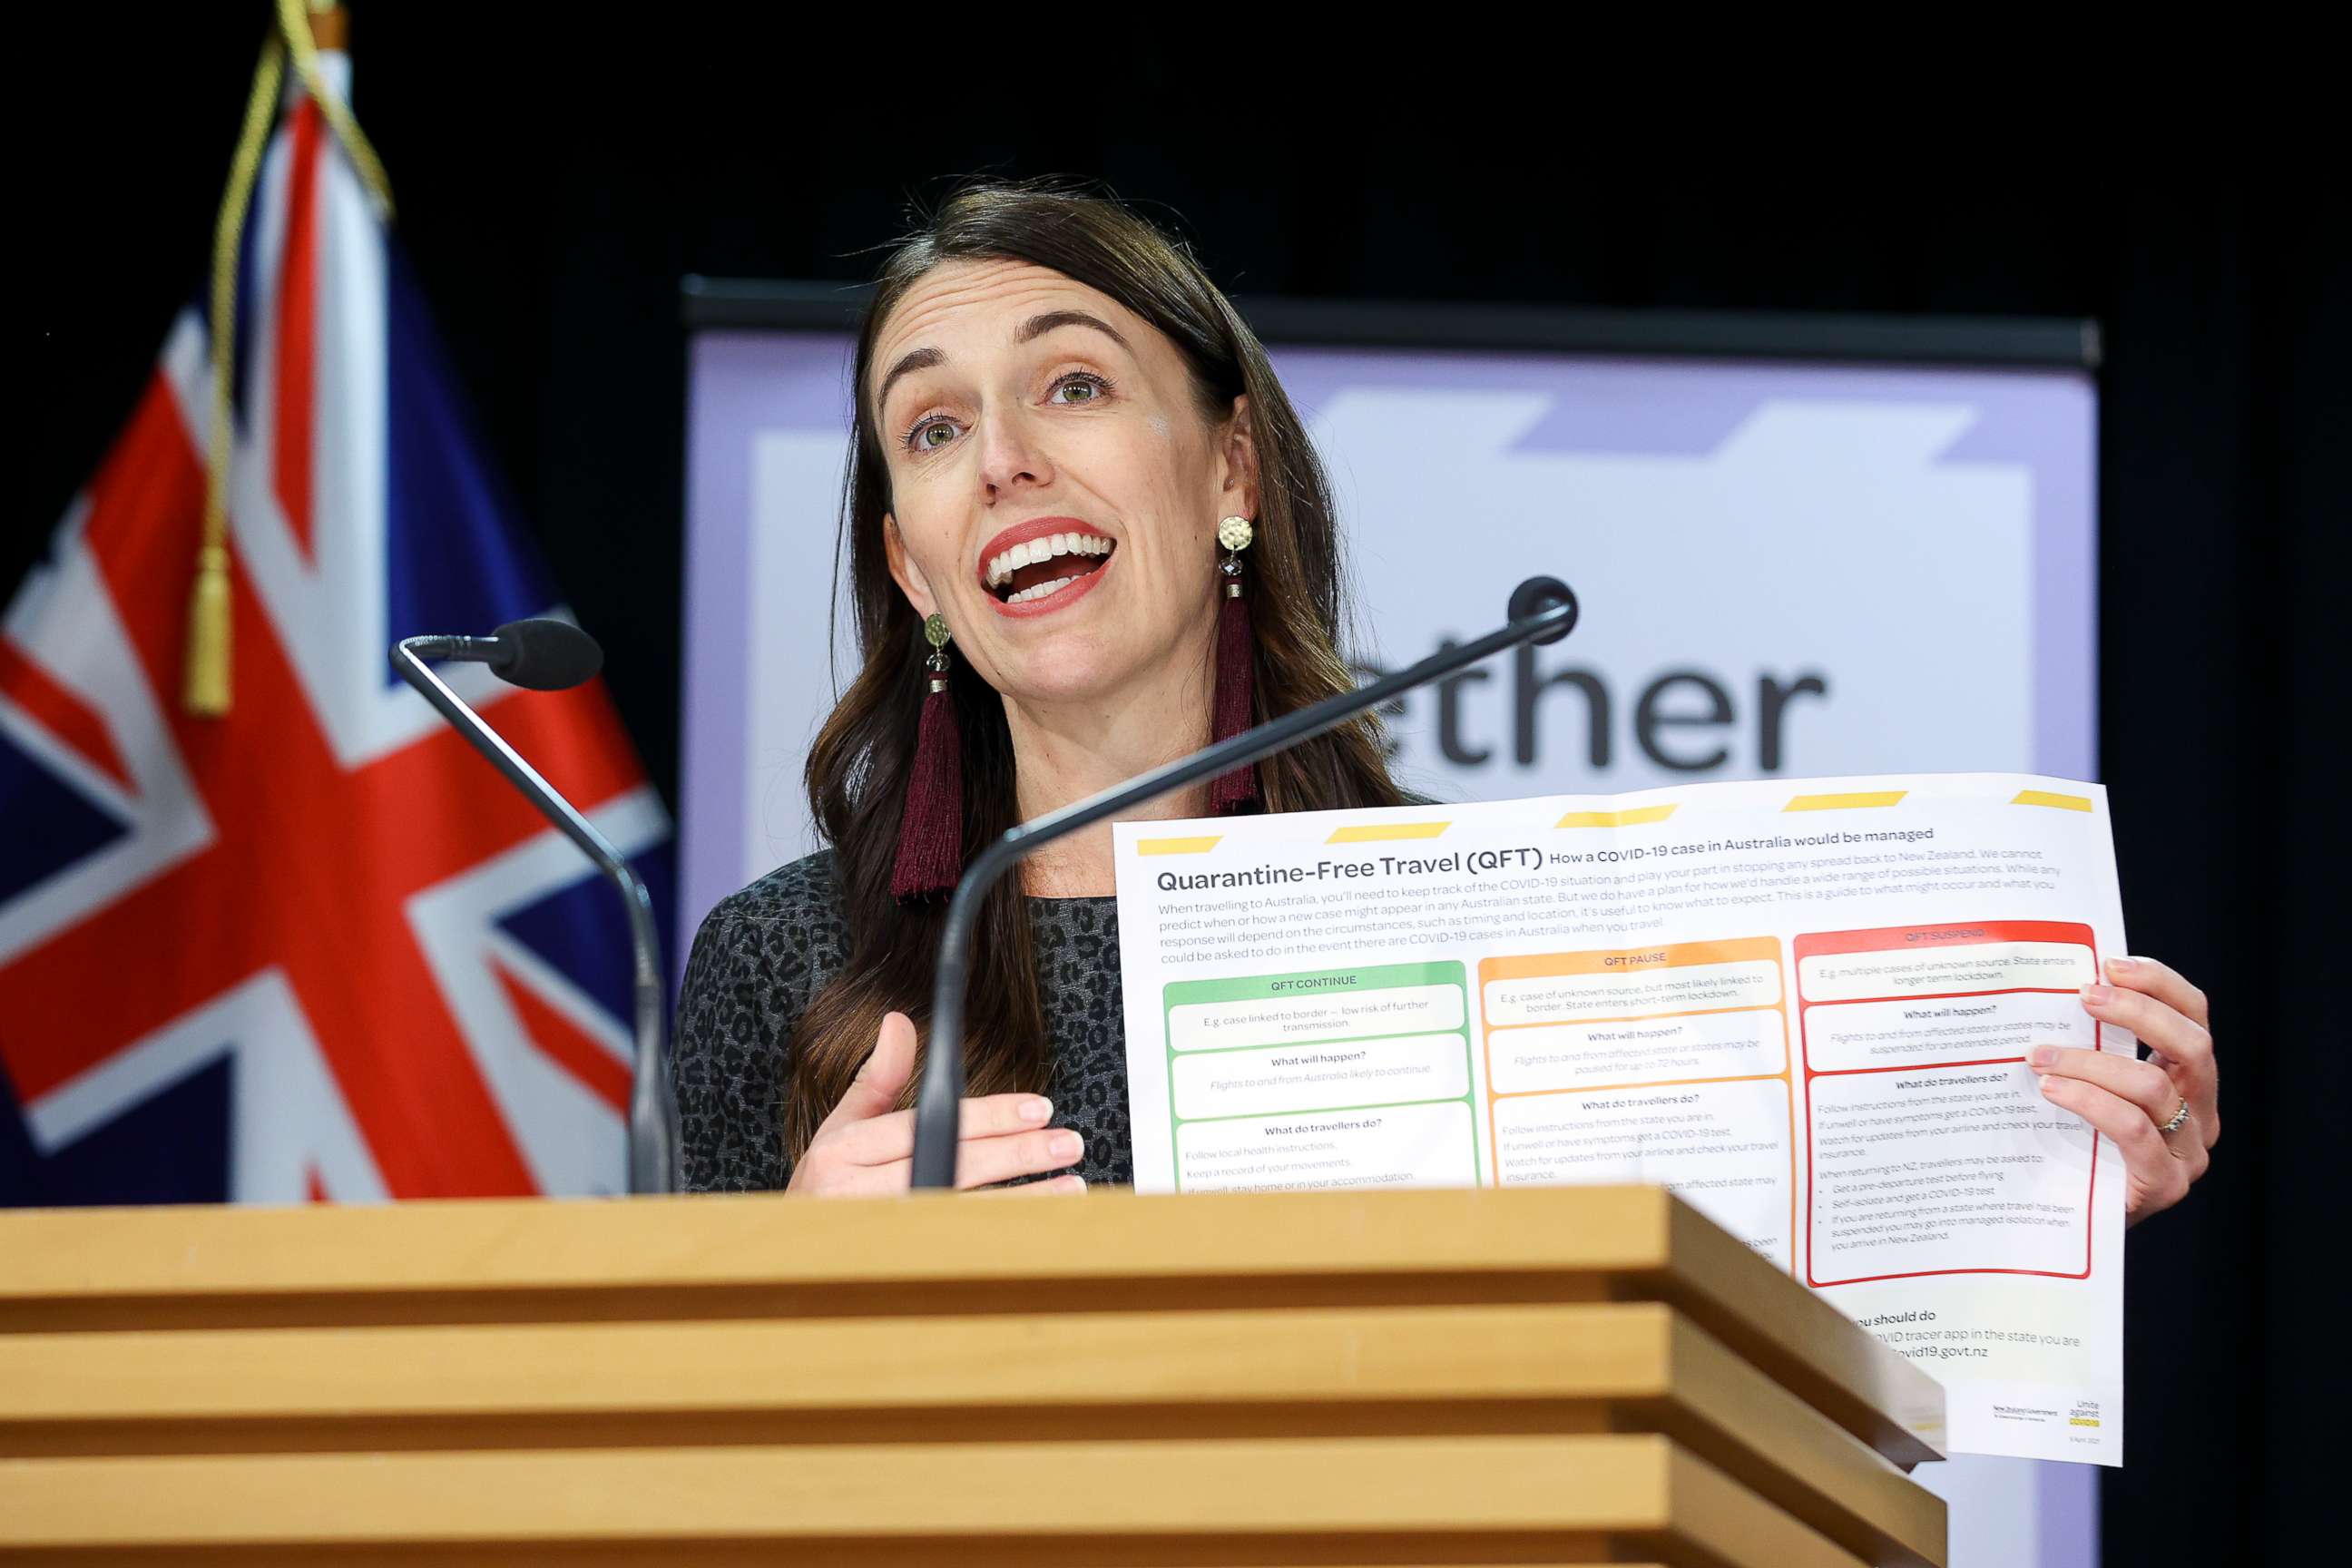 PHOTO: New Zealand Prime Minister Jacinda Ardern speaks during a press conference at Parliament in Wellington, New Zealand, on April 6, 2021, where she announced that quarantine-free travel with Australia will begin in less than two weeks.